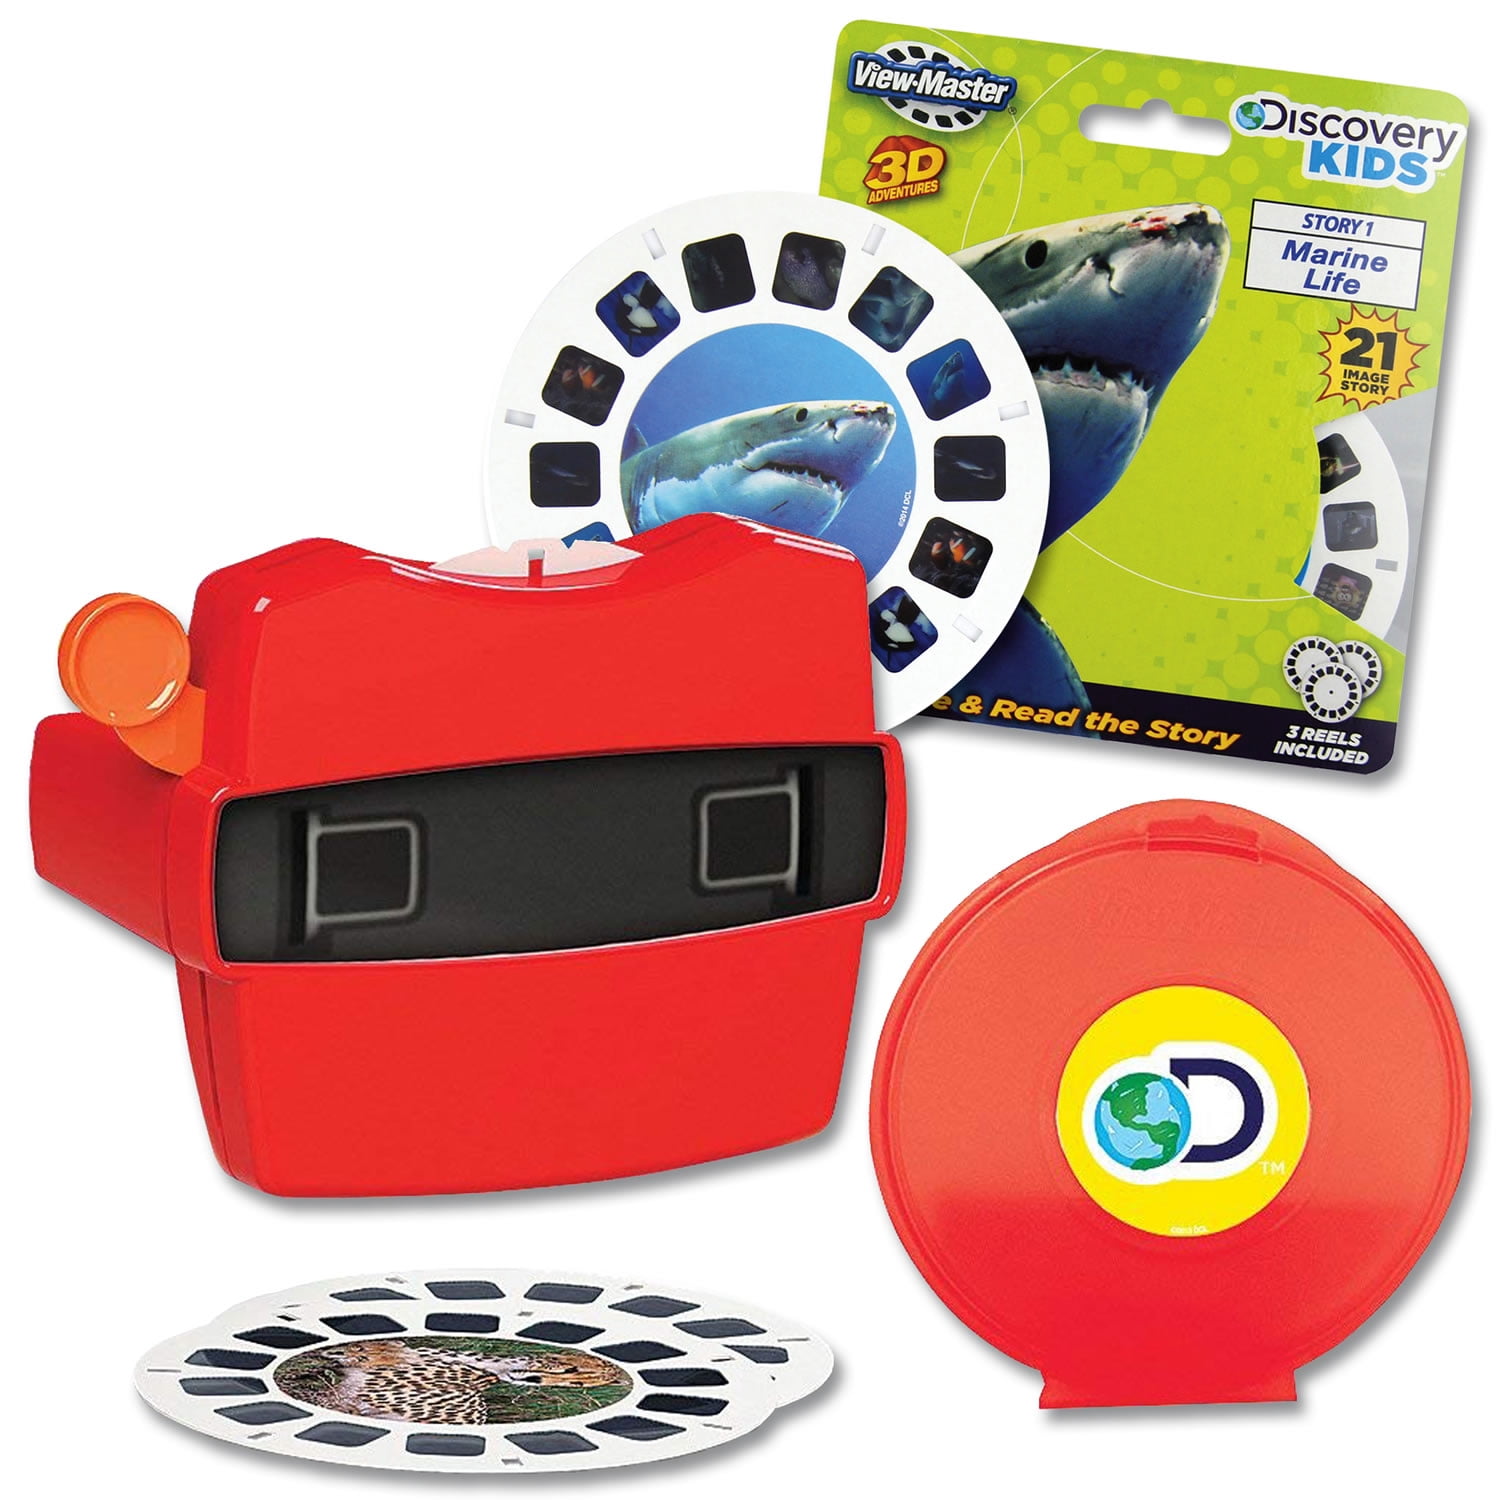 2 3D Reels Fish Shark NEW Discovery Kids MARINE LIFE View-Master SET Viewer 